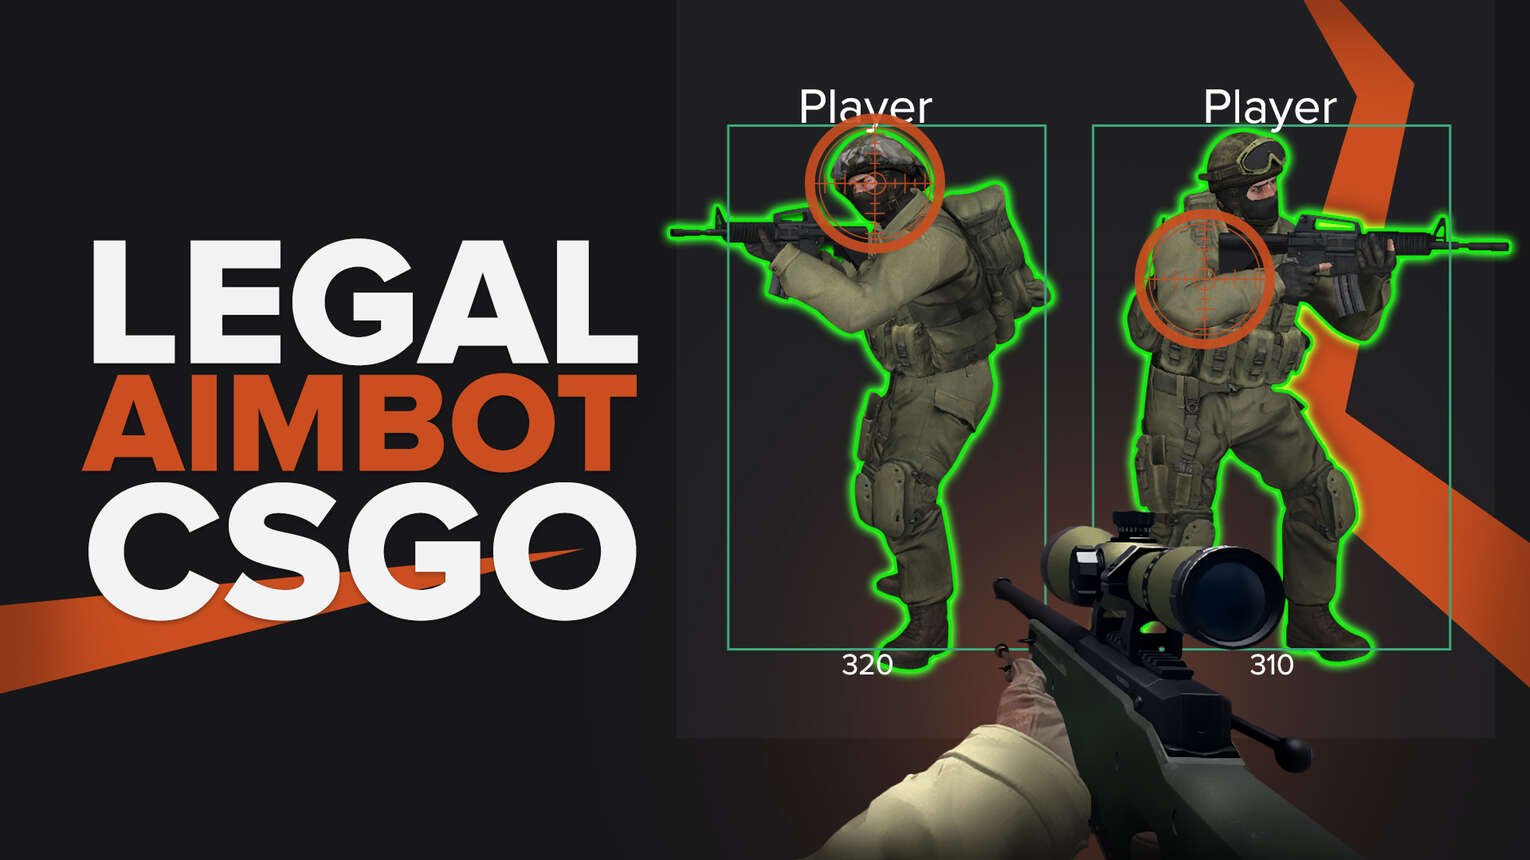 Aimbot - What does aimbot mean?